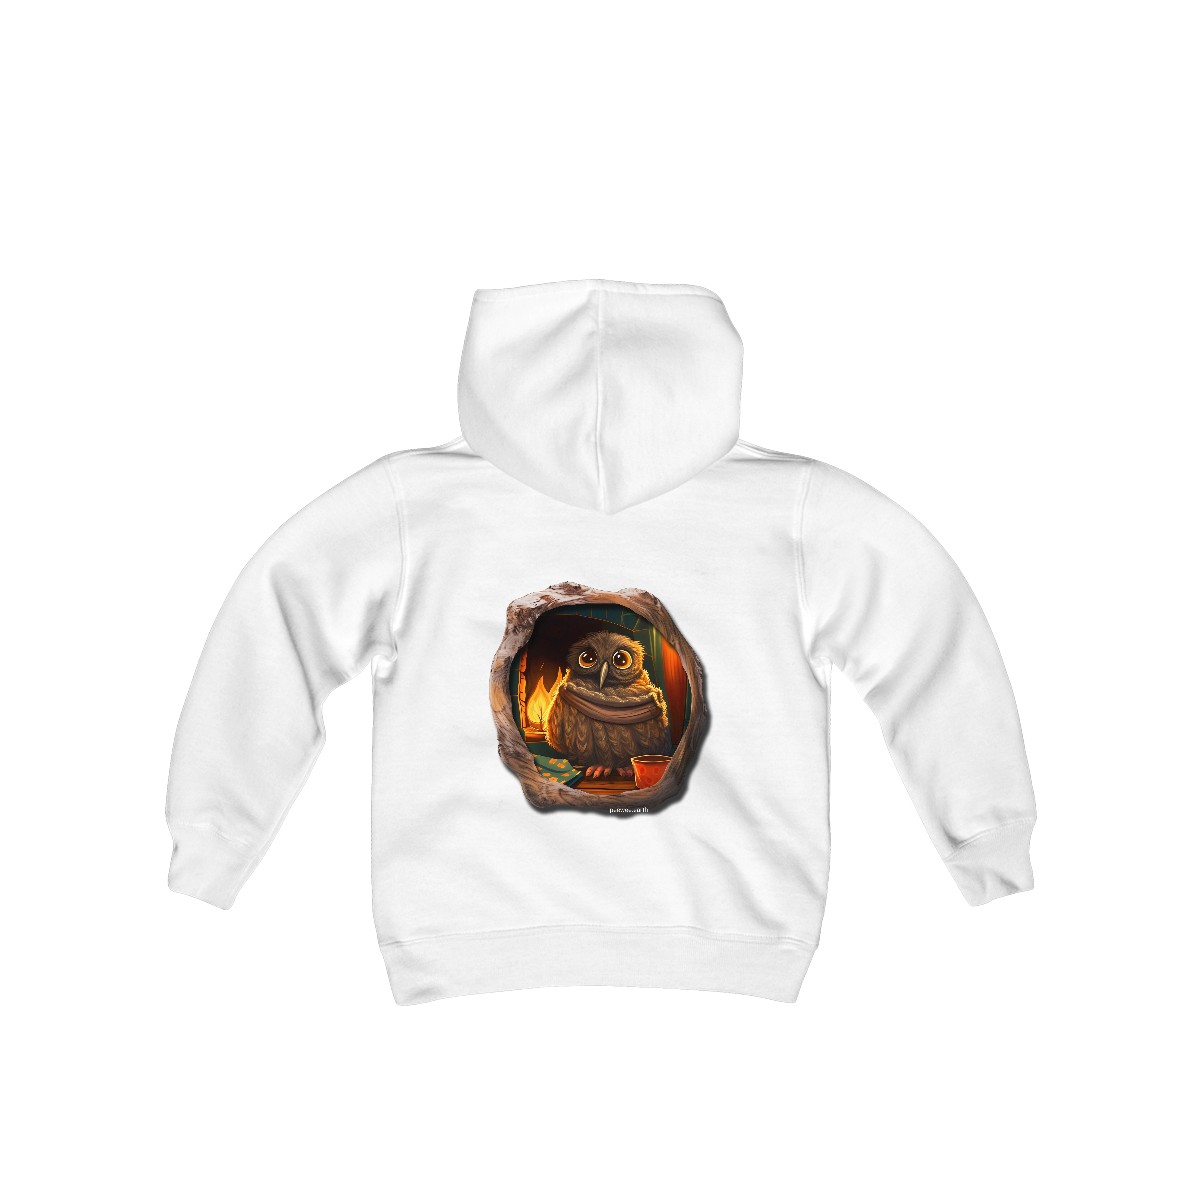 Official Peewee the Potoo youth hoodie - Cozy Peewee product thumbnail image